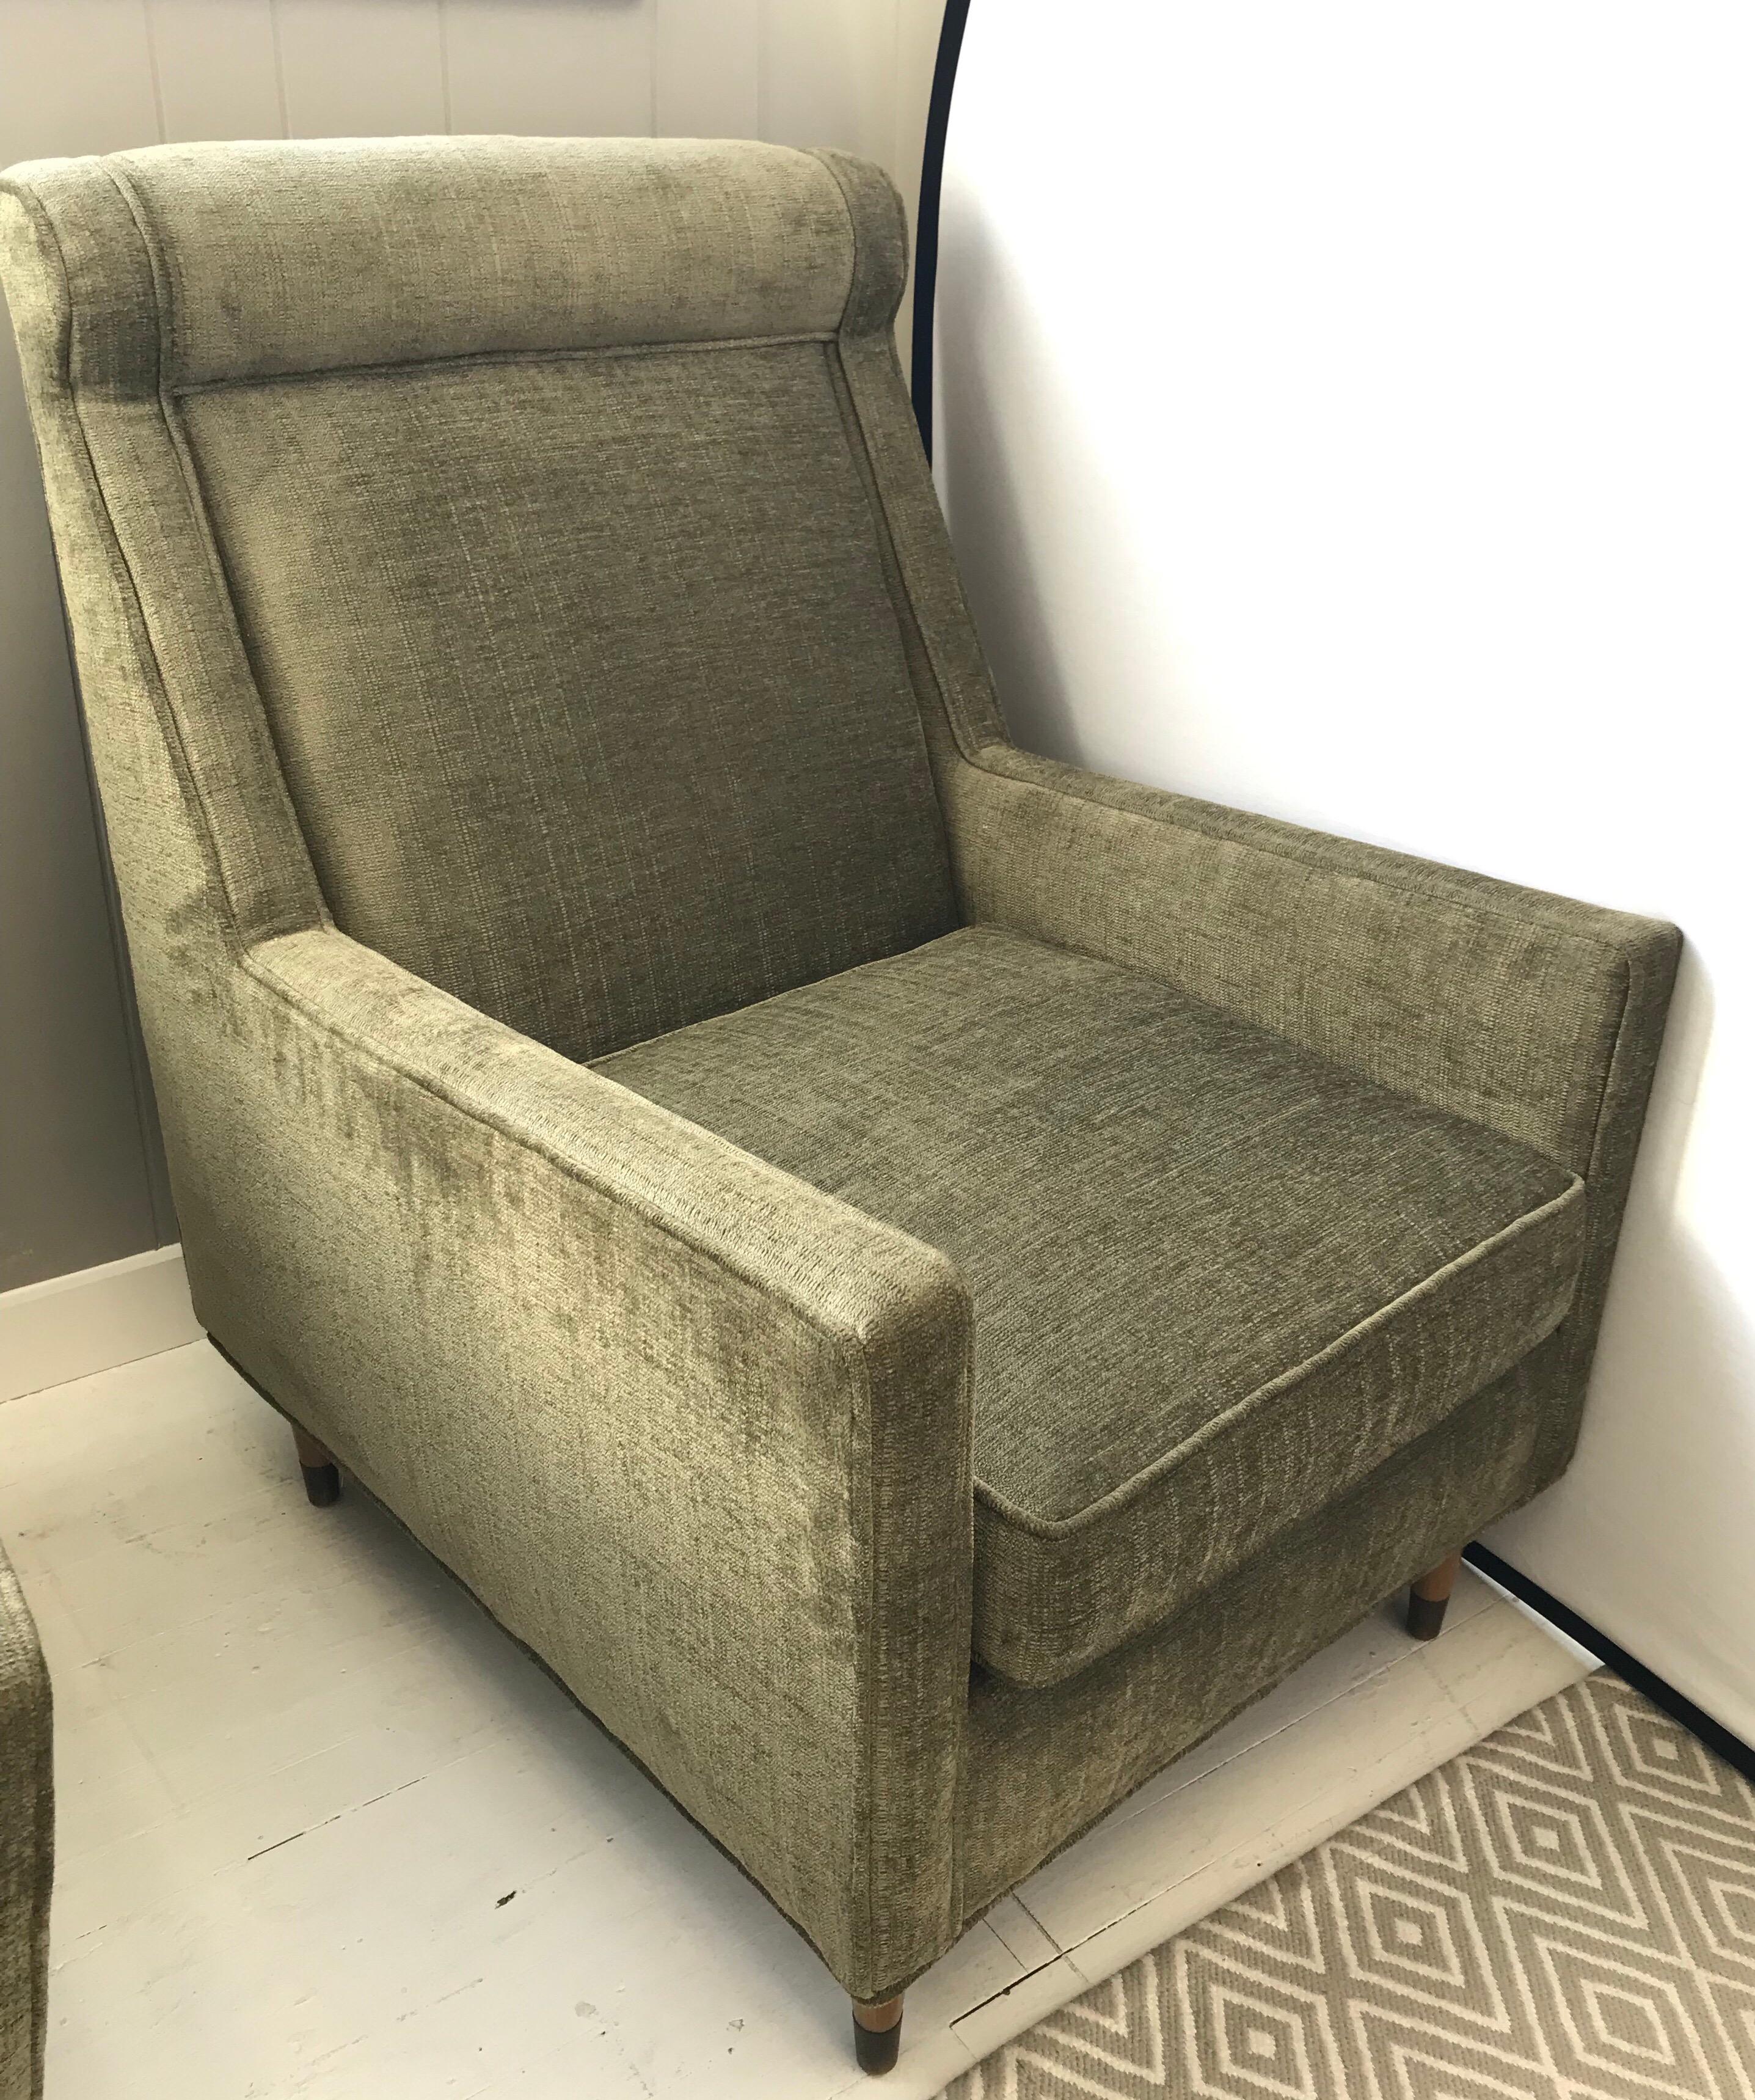 Sleek and comfortable midcentury lounge chair done in a olive green velveteen fabric.